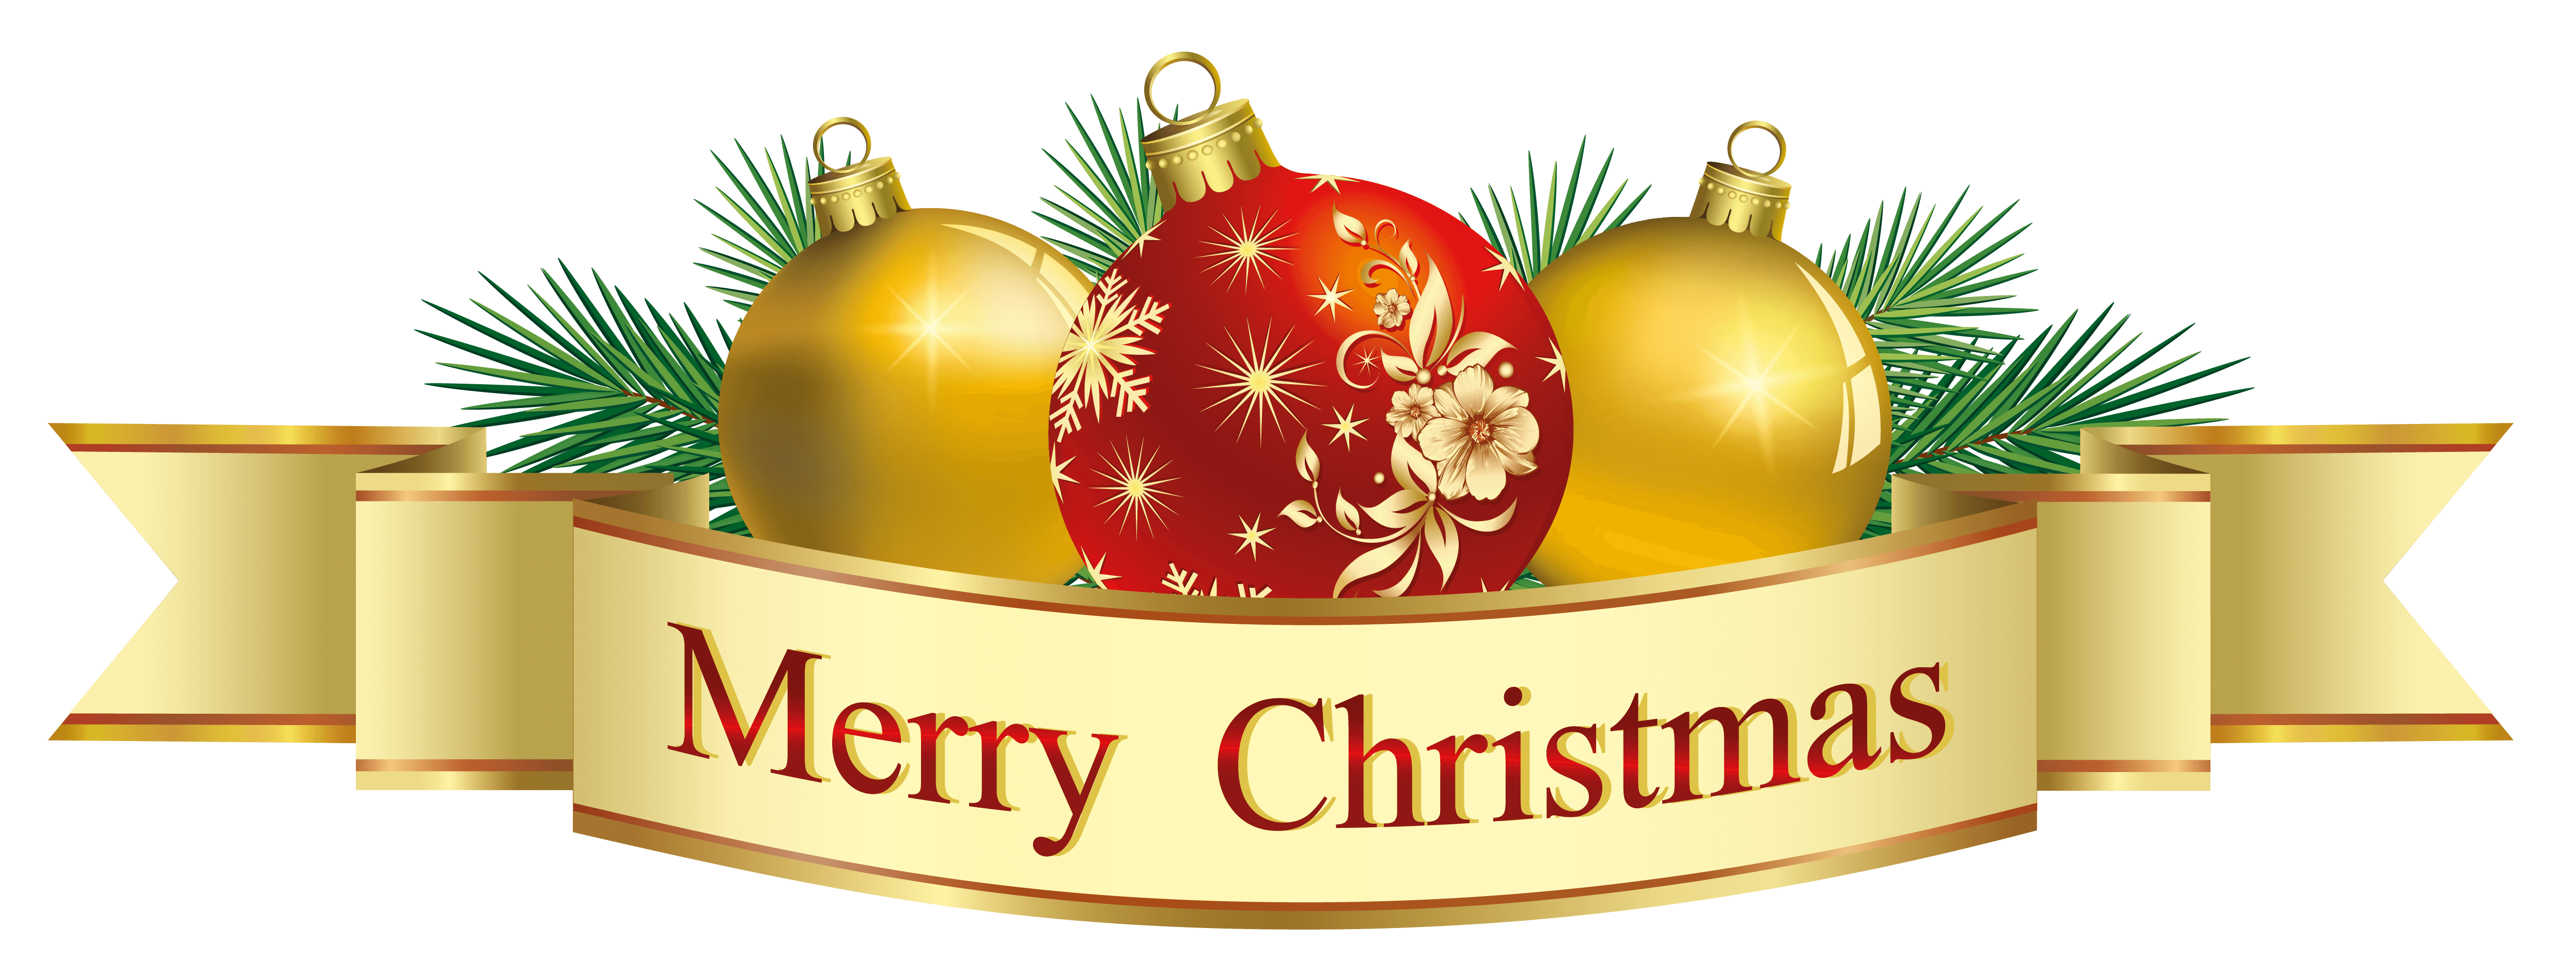 Merry christmas and happy. December clipart message